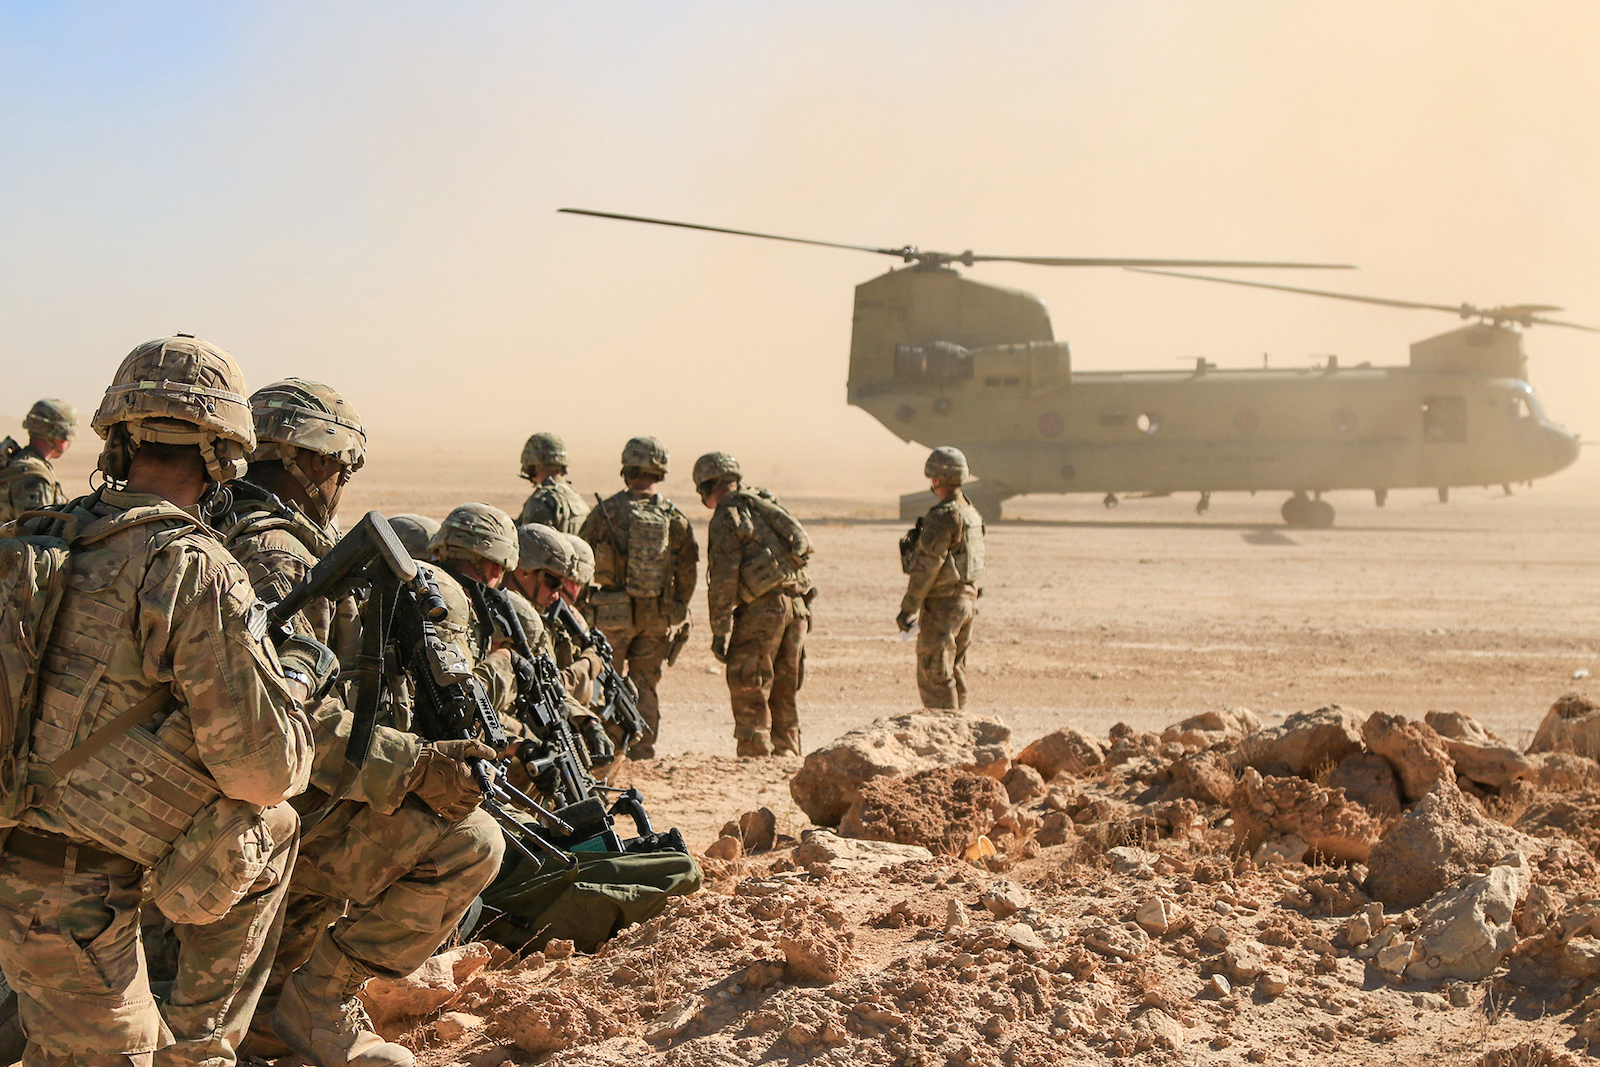 U.S. soldiers stationed in Iraq in 2018